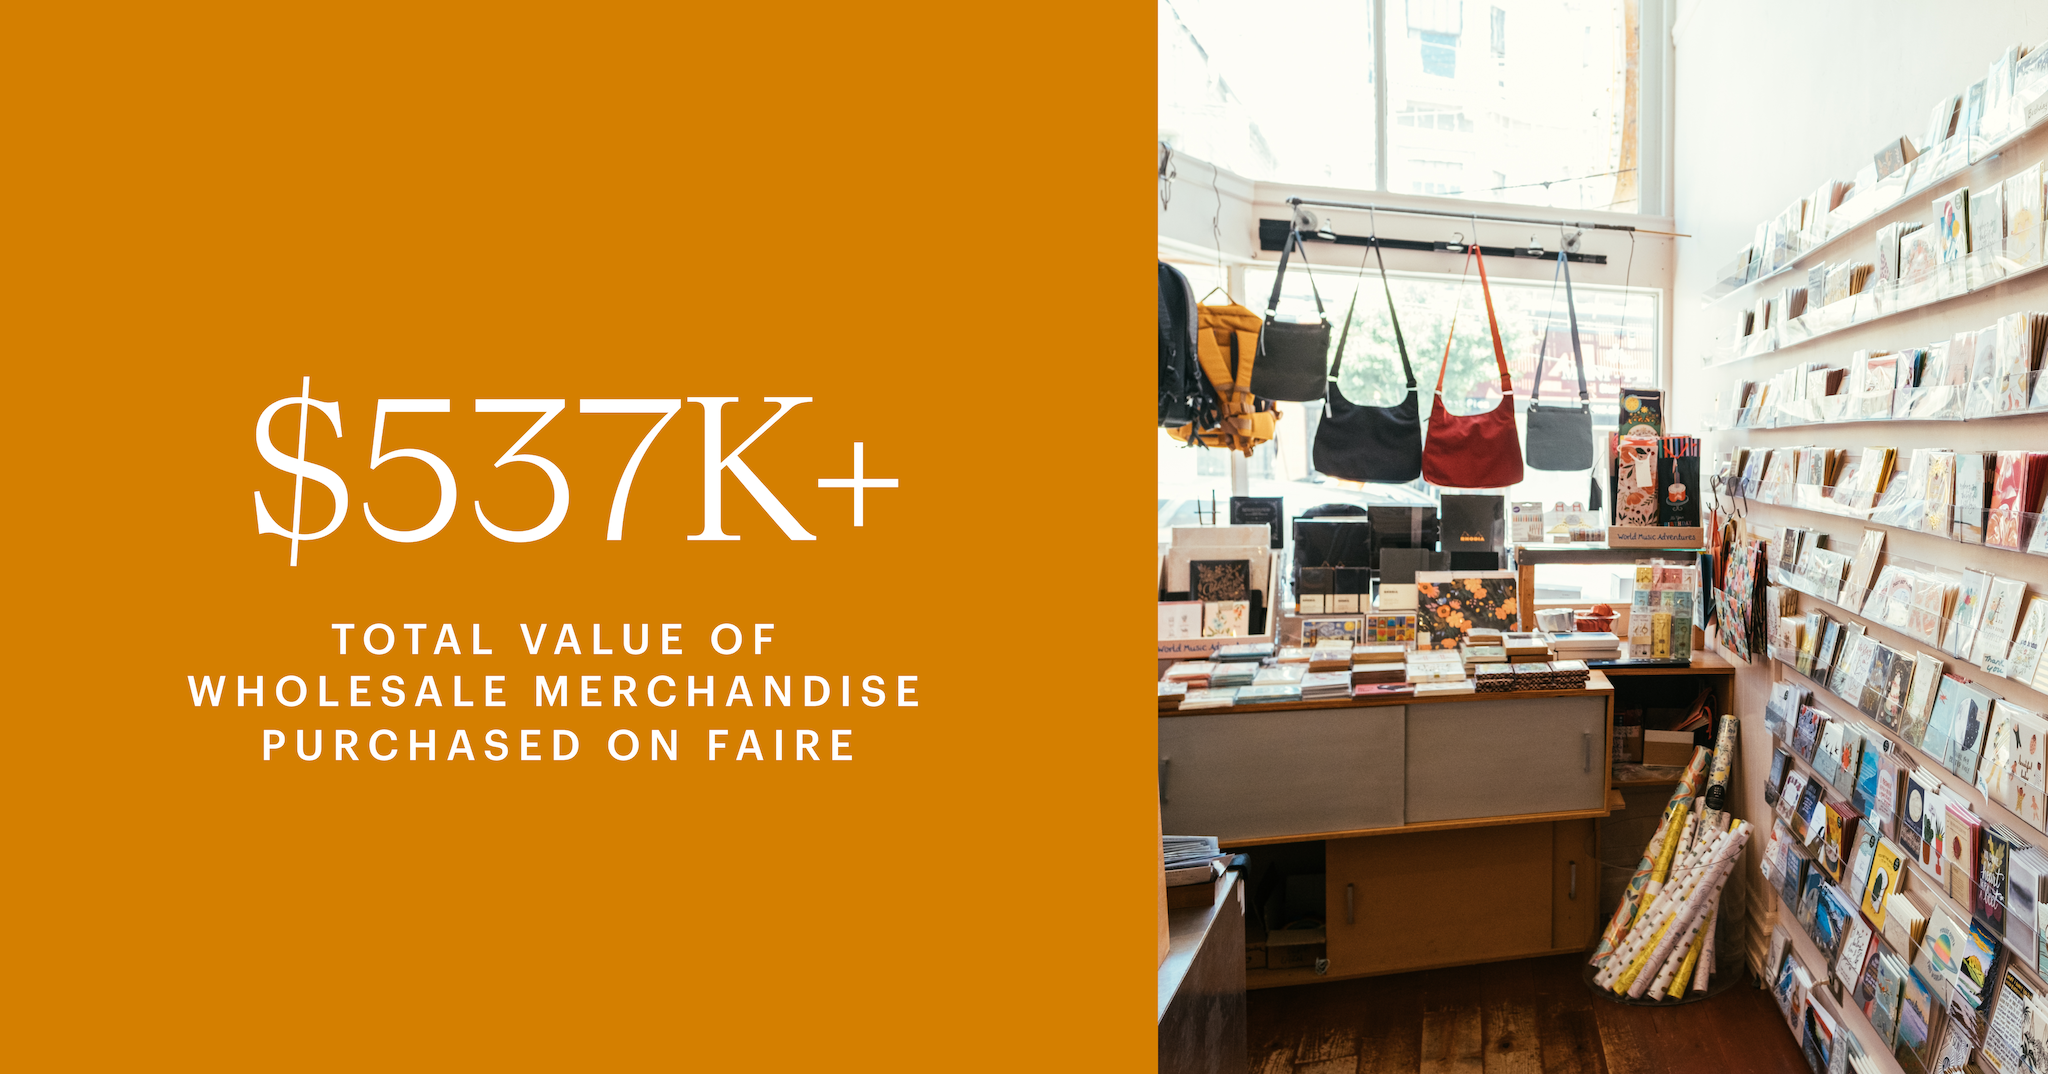 The total value of wholesale merchandise WINK SF has purchased on Faire